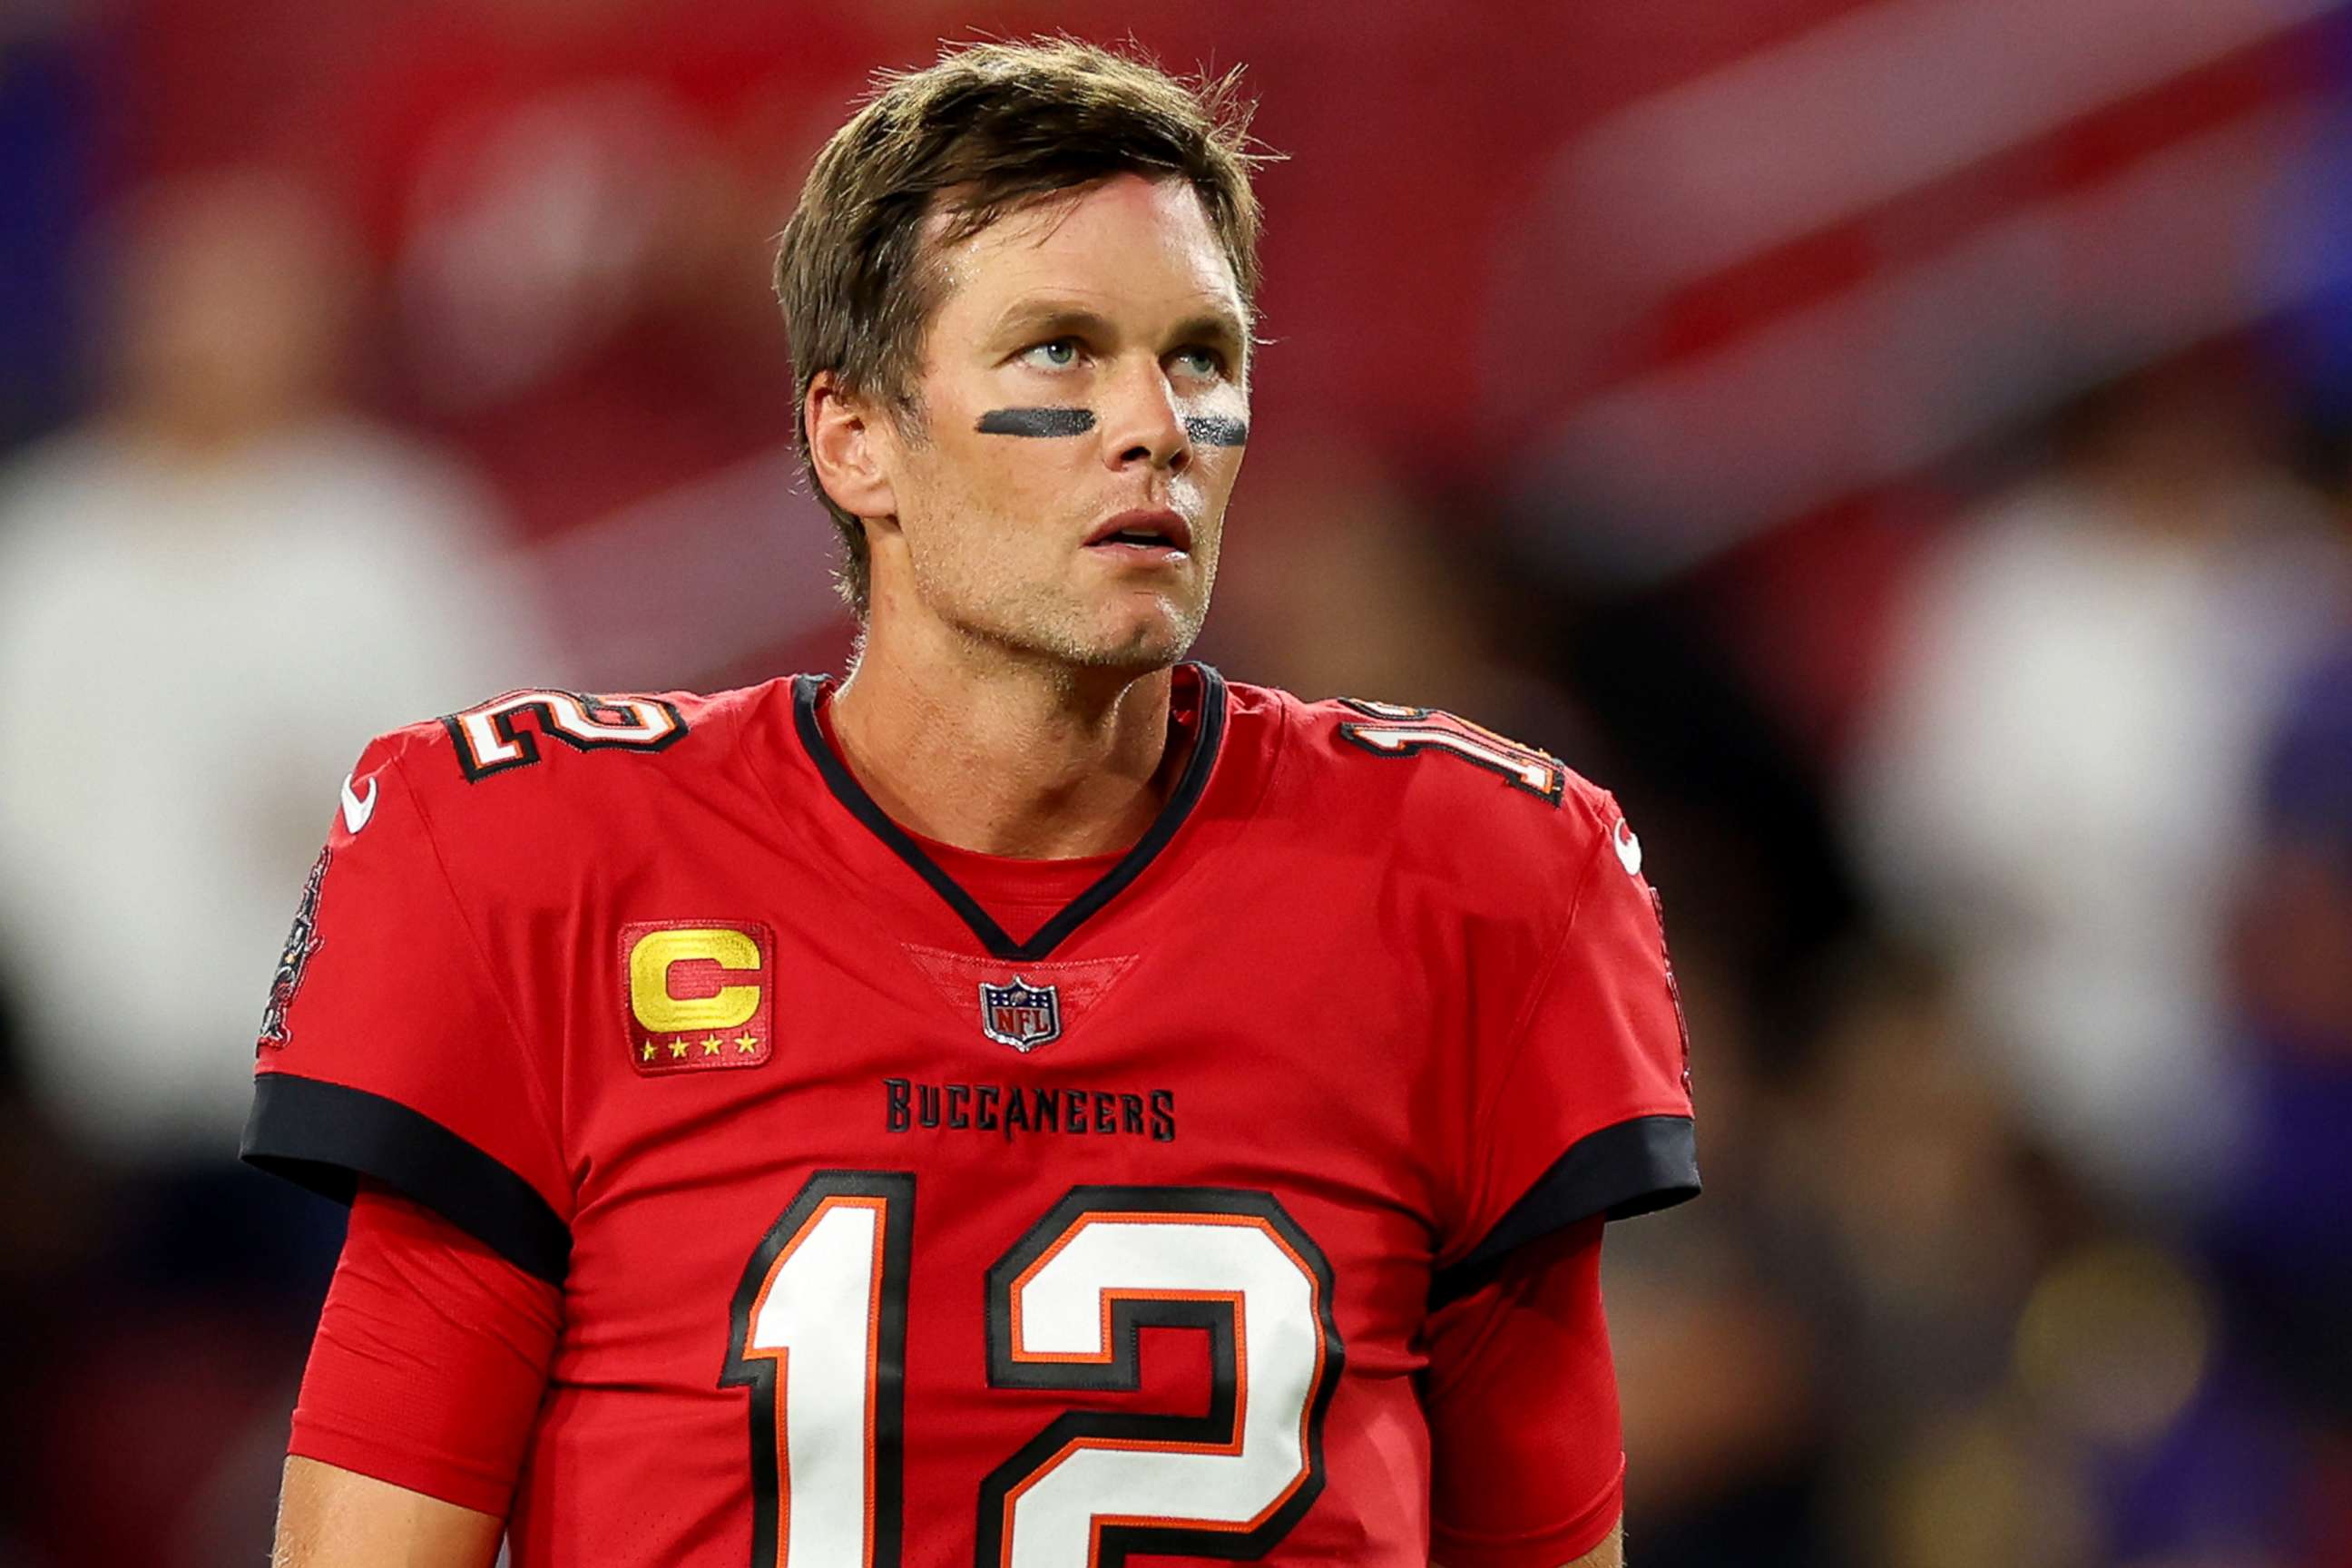 Want a Buccaneers Tom Brady jersey? Here's why you should wait on that